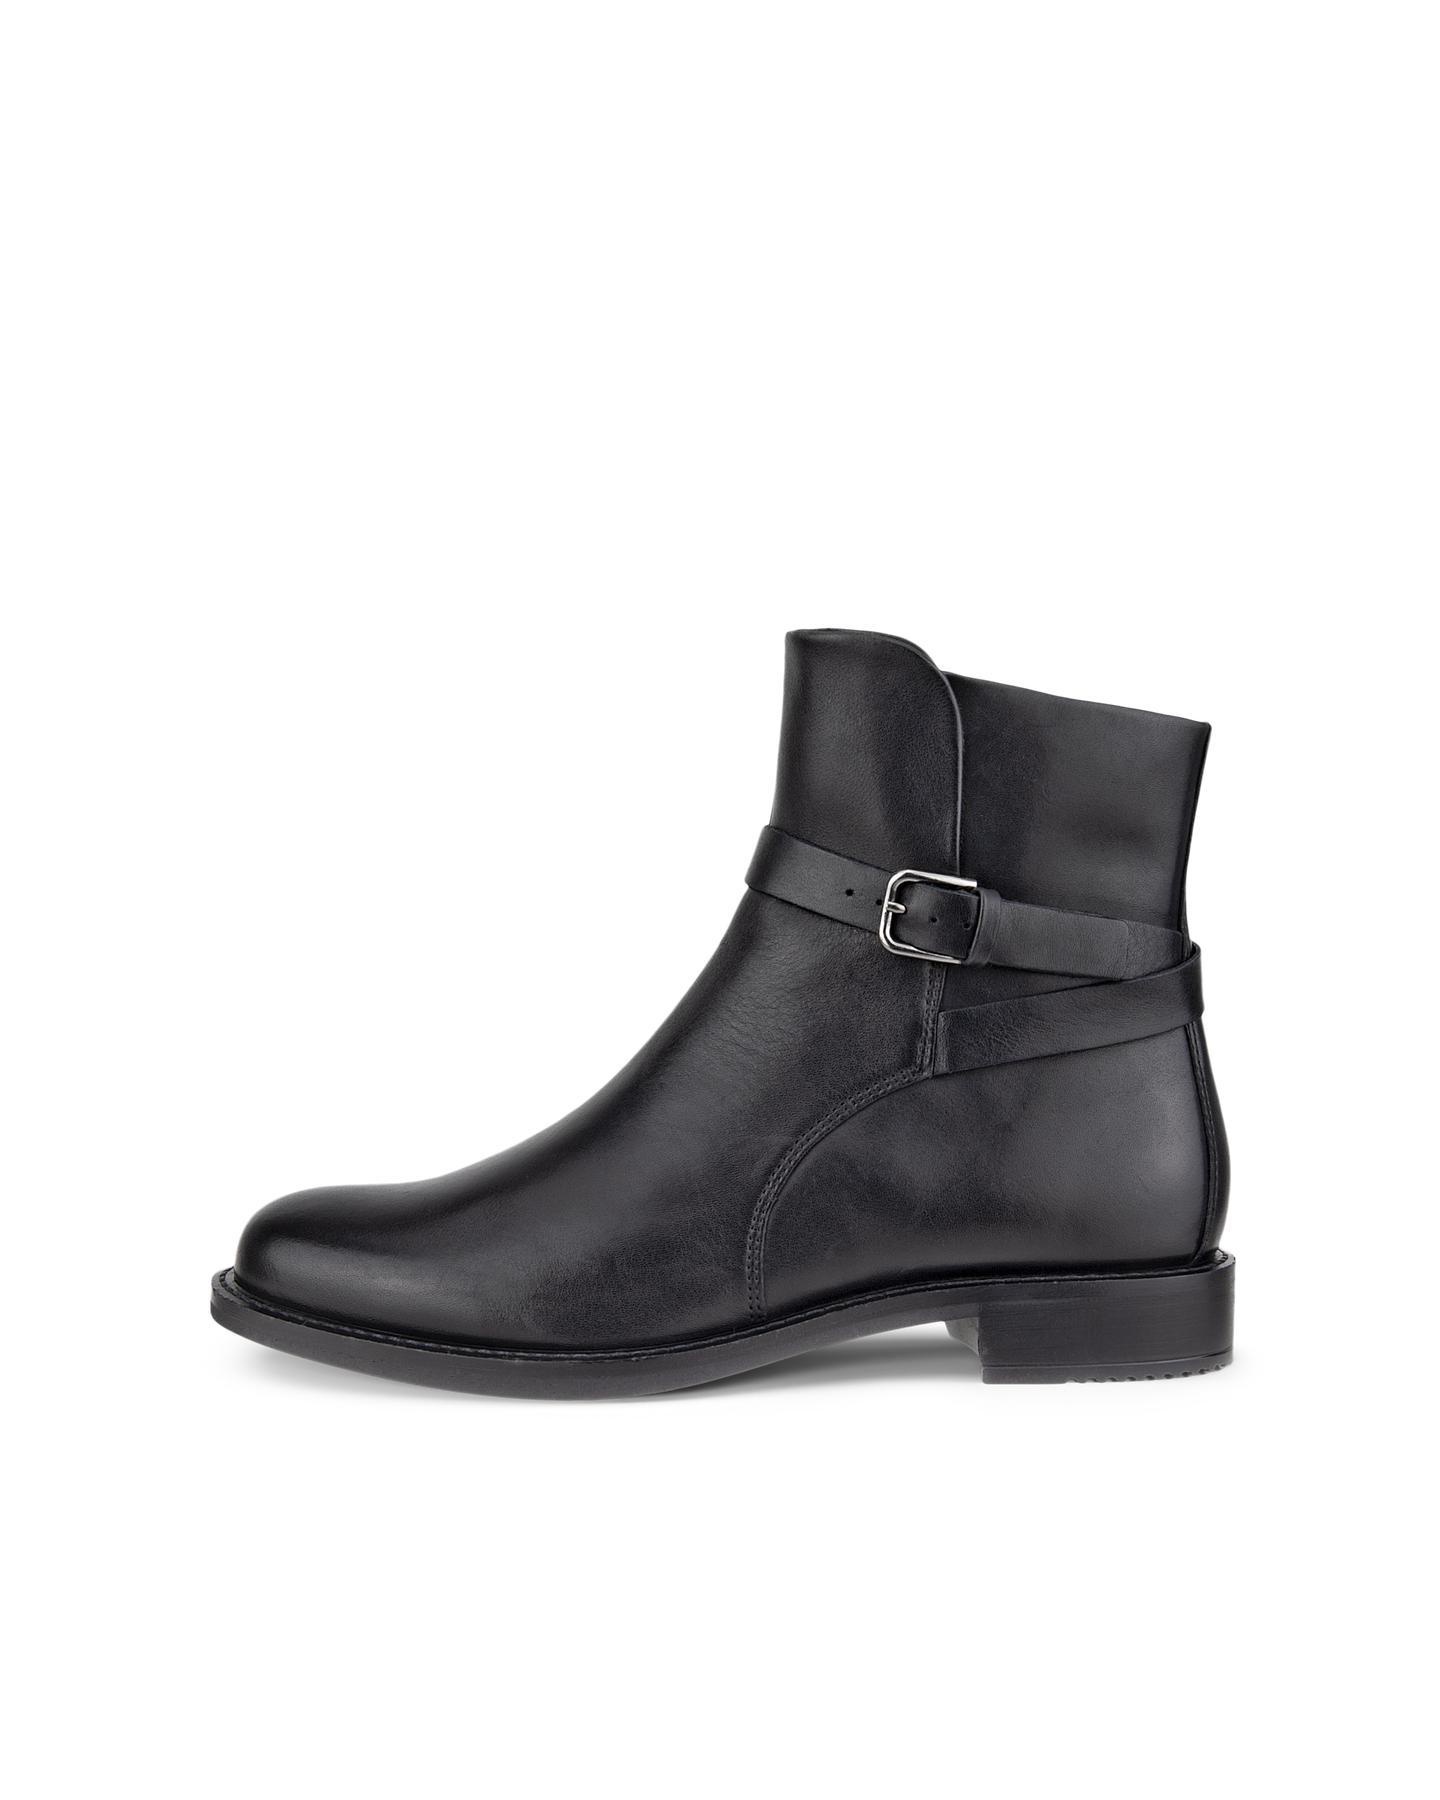 ECCO Sartorelle 25 Leather Mid Buckle Boots Product Image